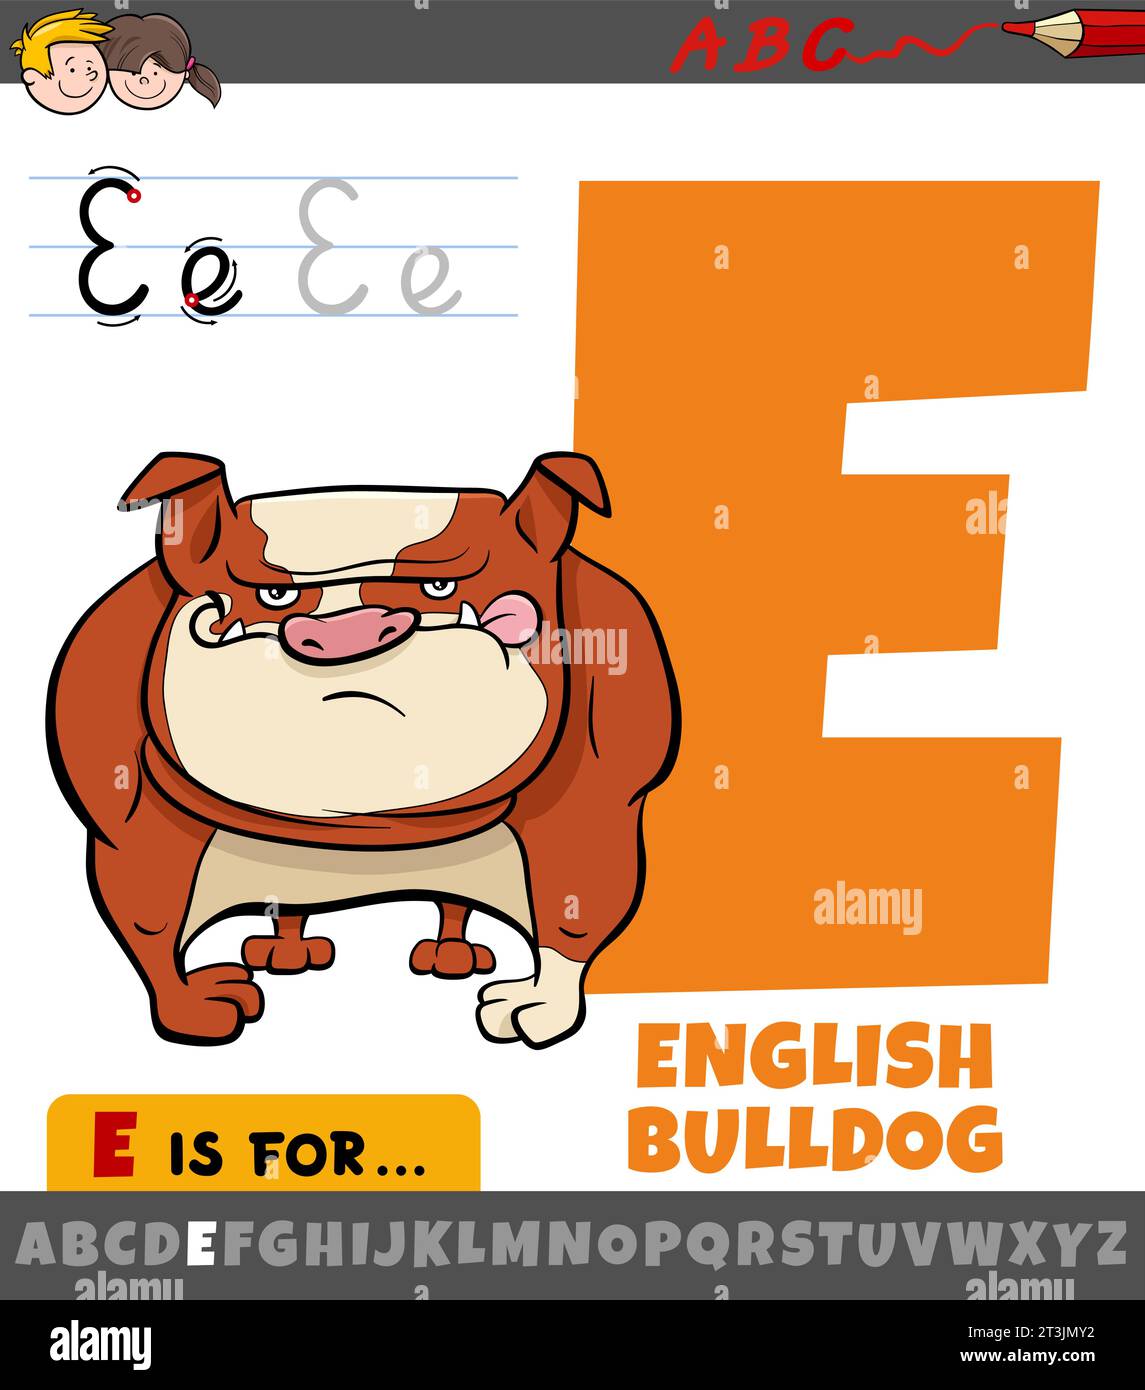 Educational cartoon illustration of letter E from alphabet with English bulldog animal character Stock Vector